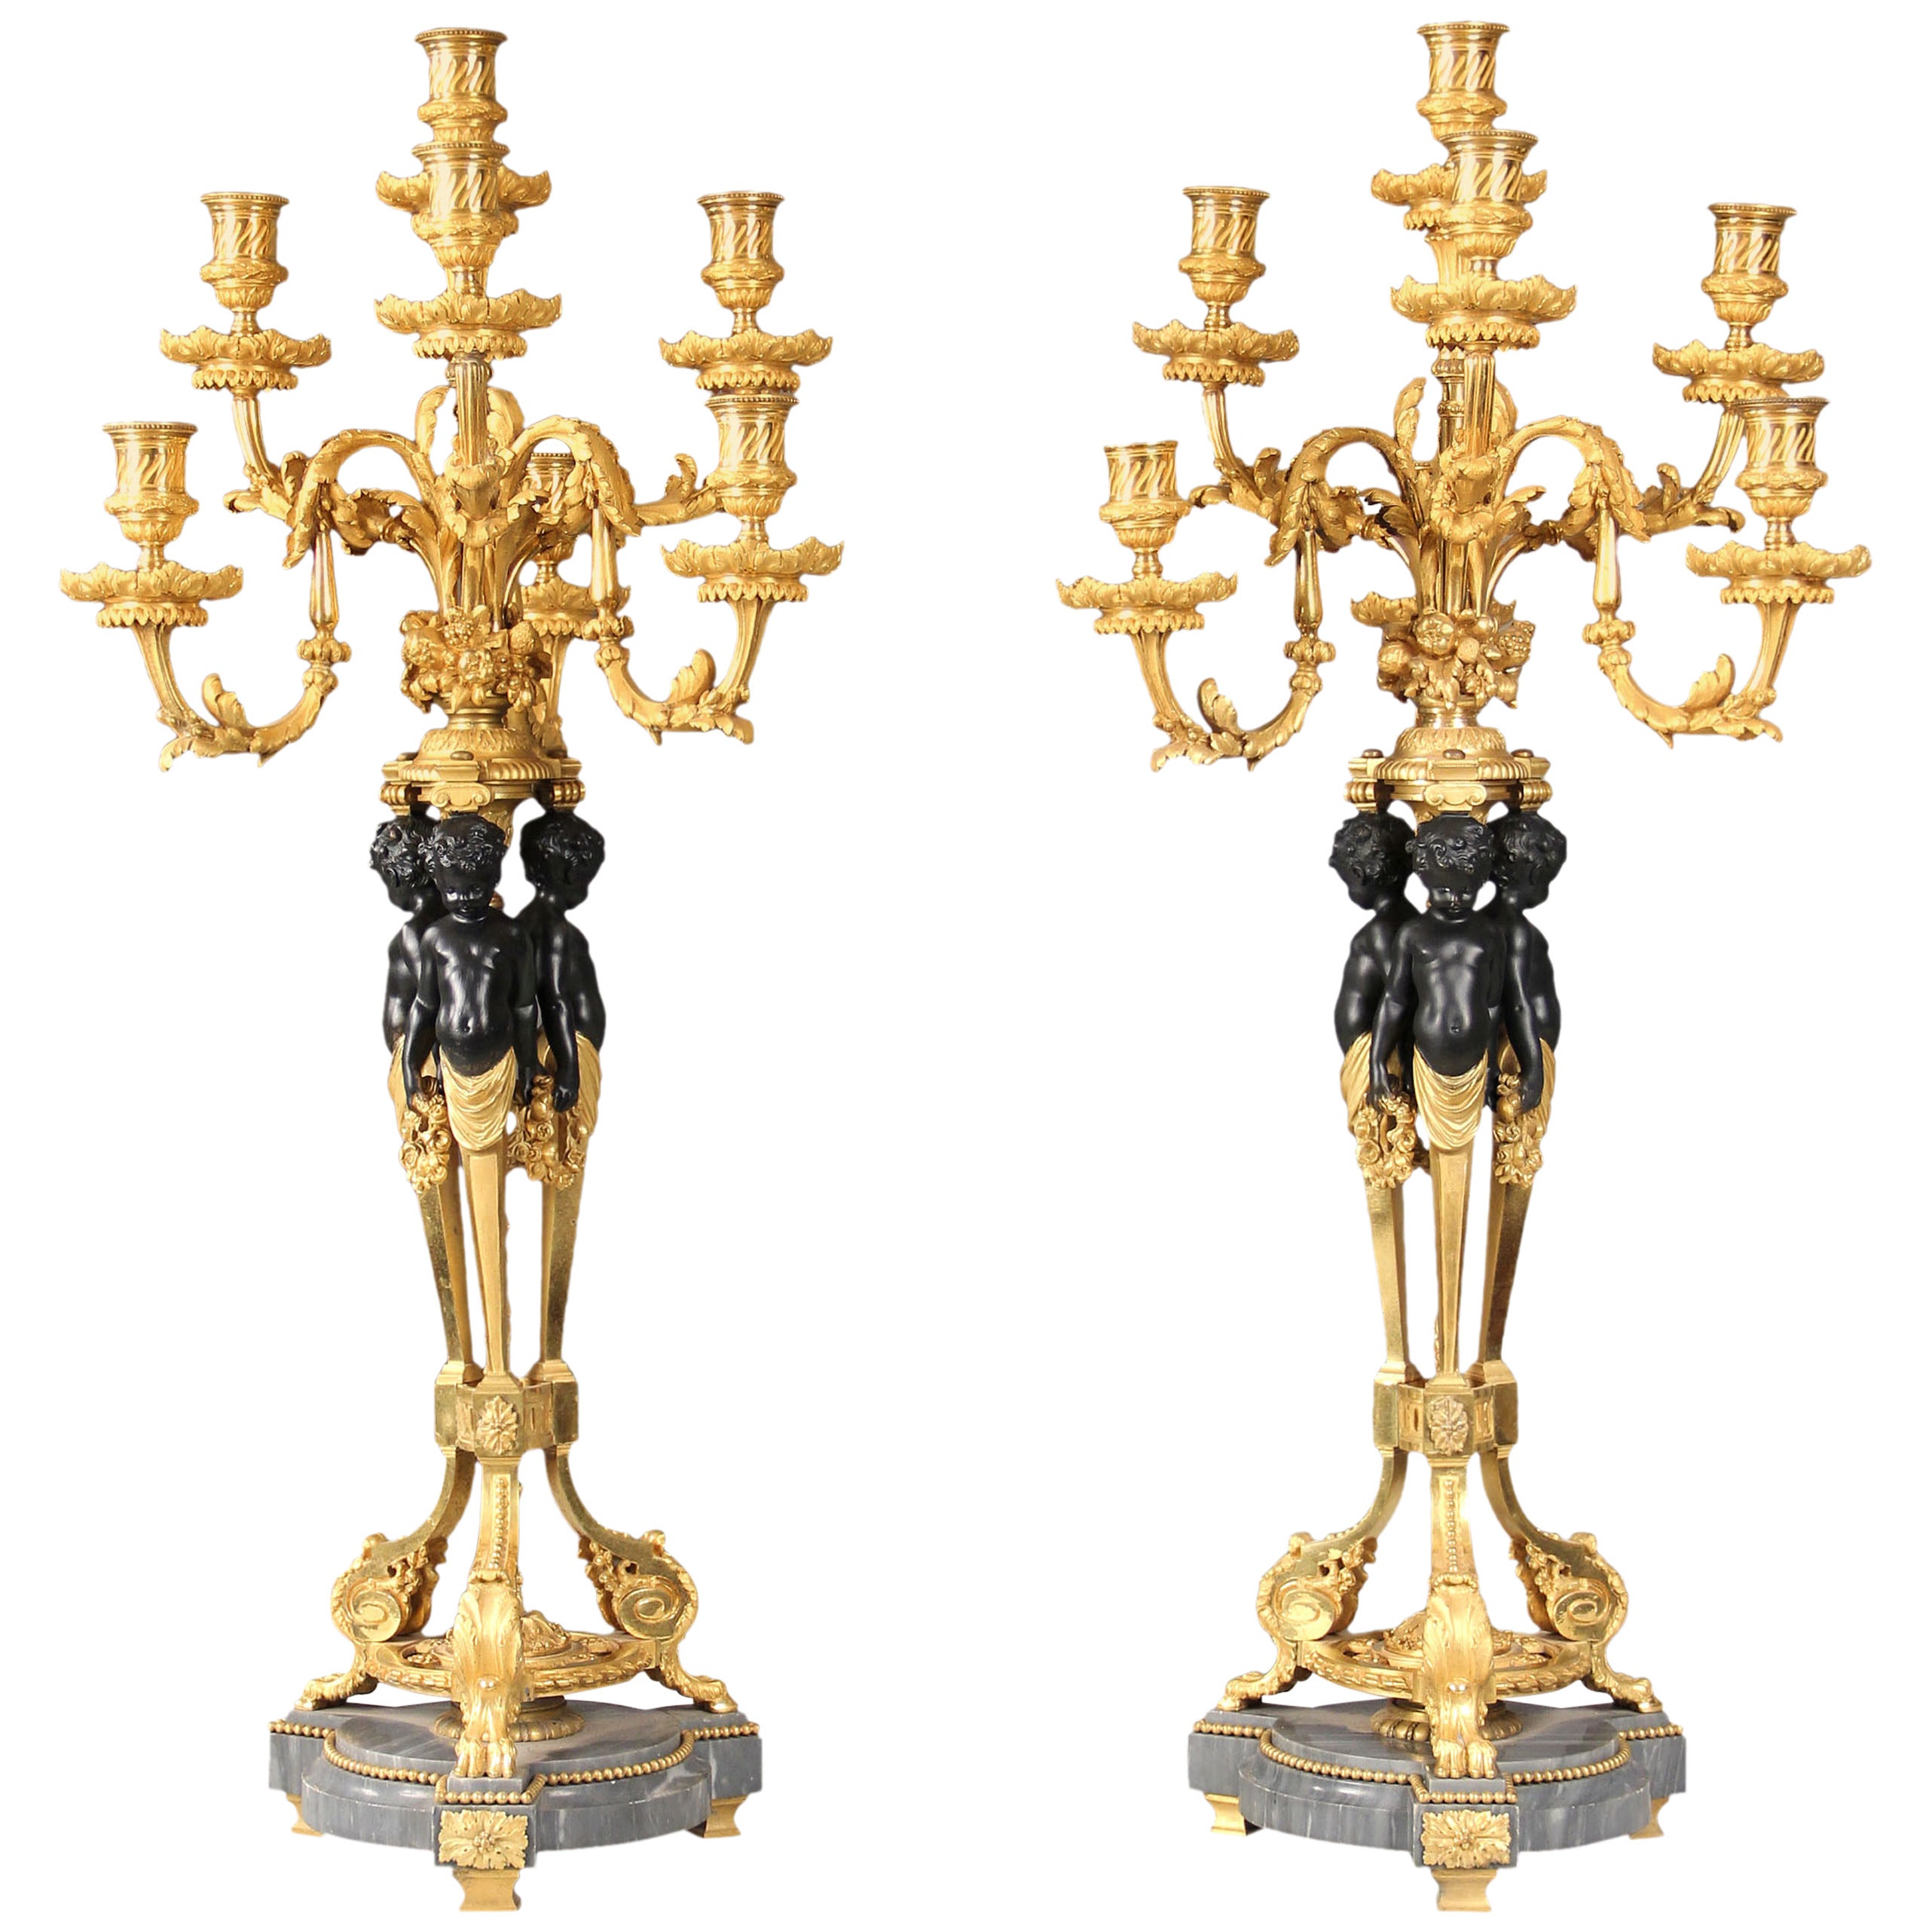 Pair of Late 19th Century or Early 20th Century Seven-Light Candelabra For Sale